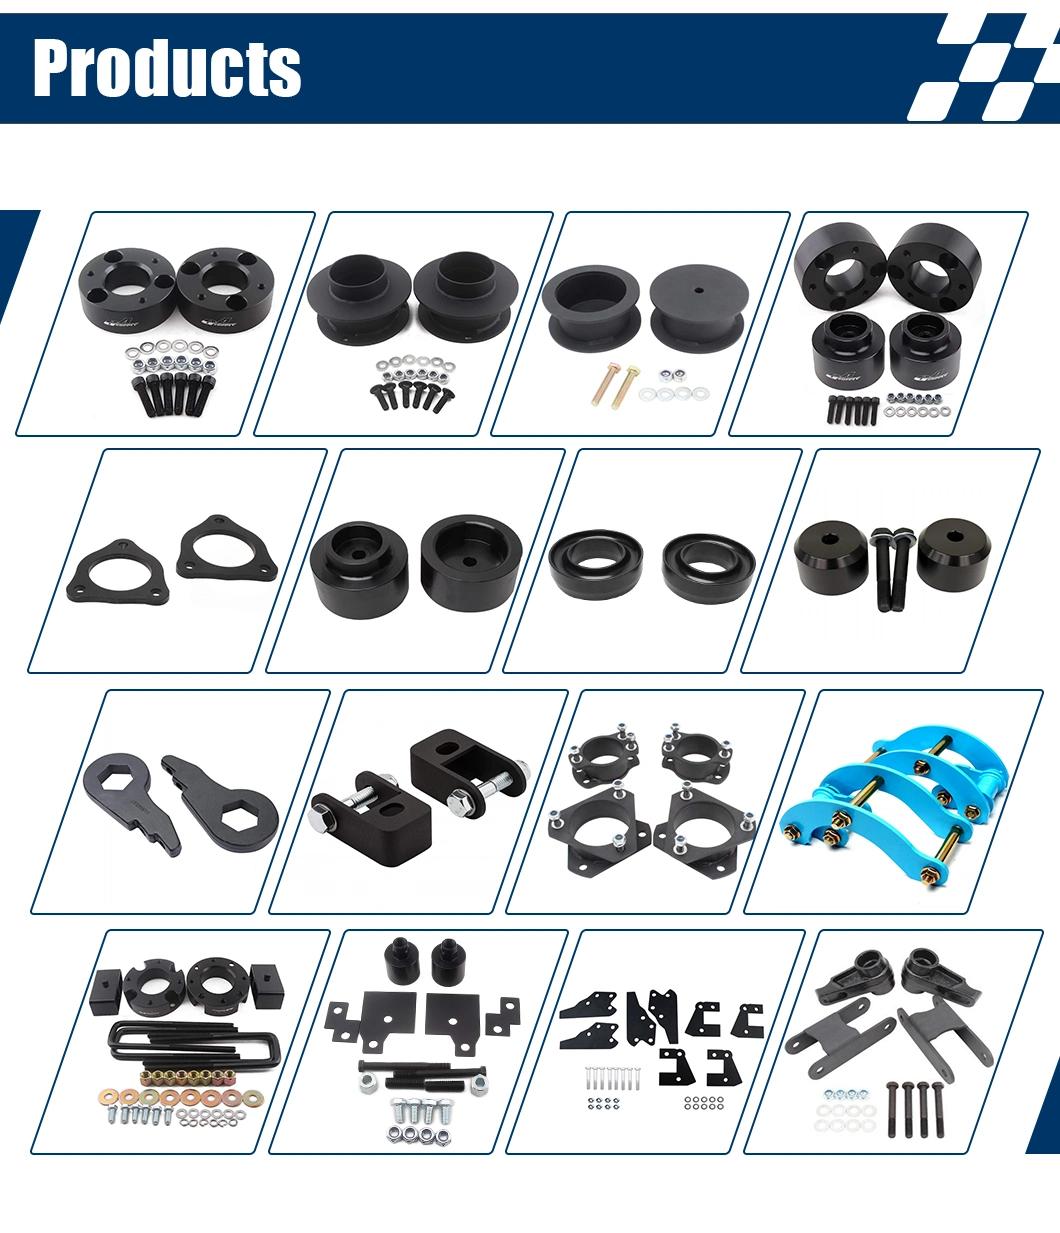 1.5" Front Lift Kit with Strut Spacers Leveling Spacer 2WD 4WD